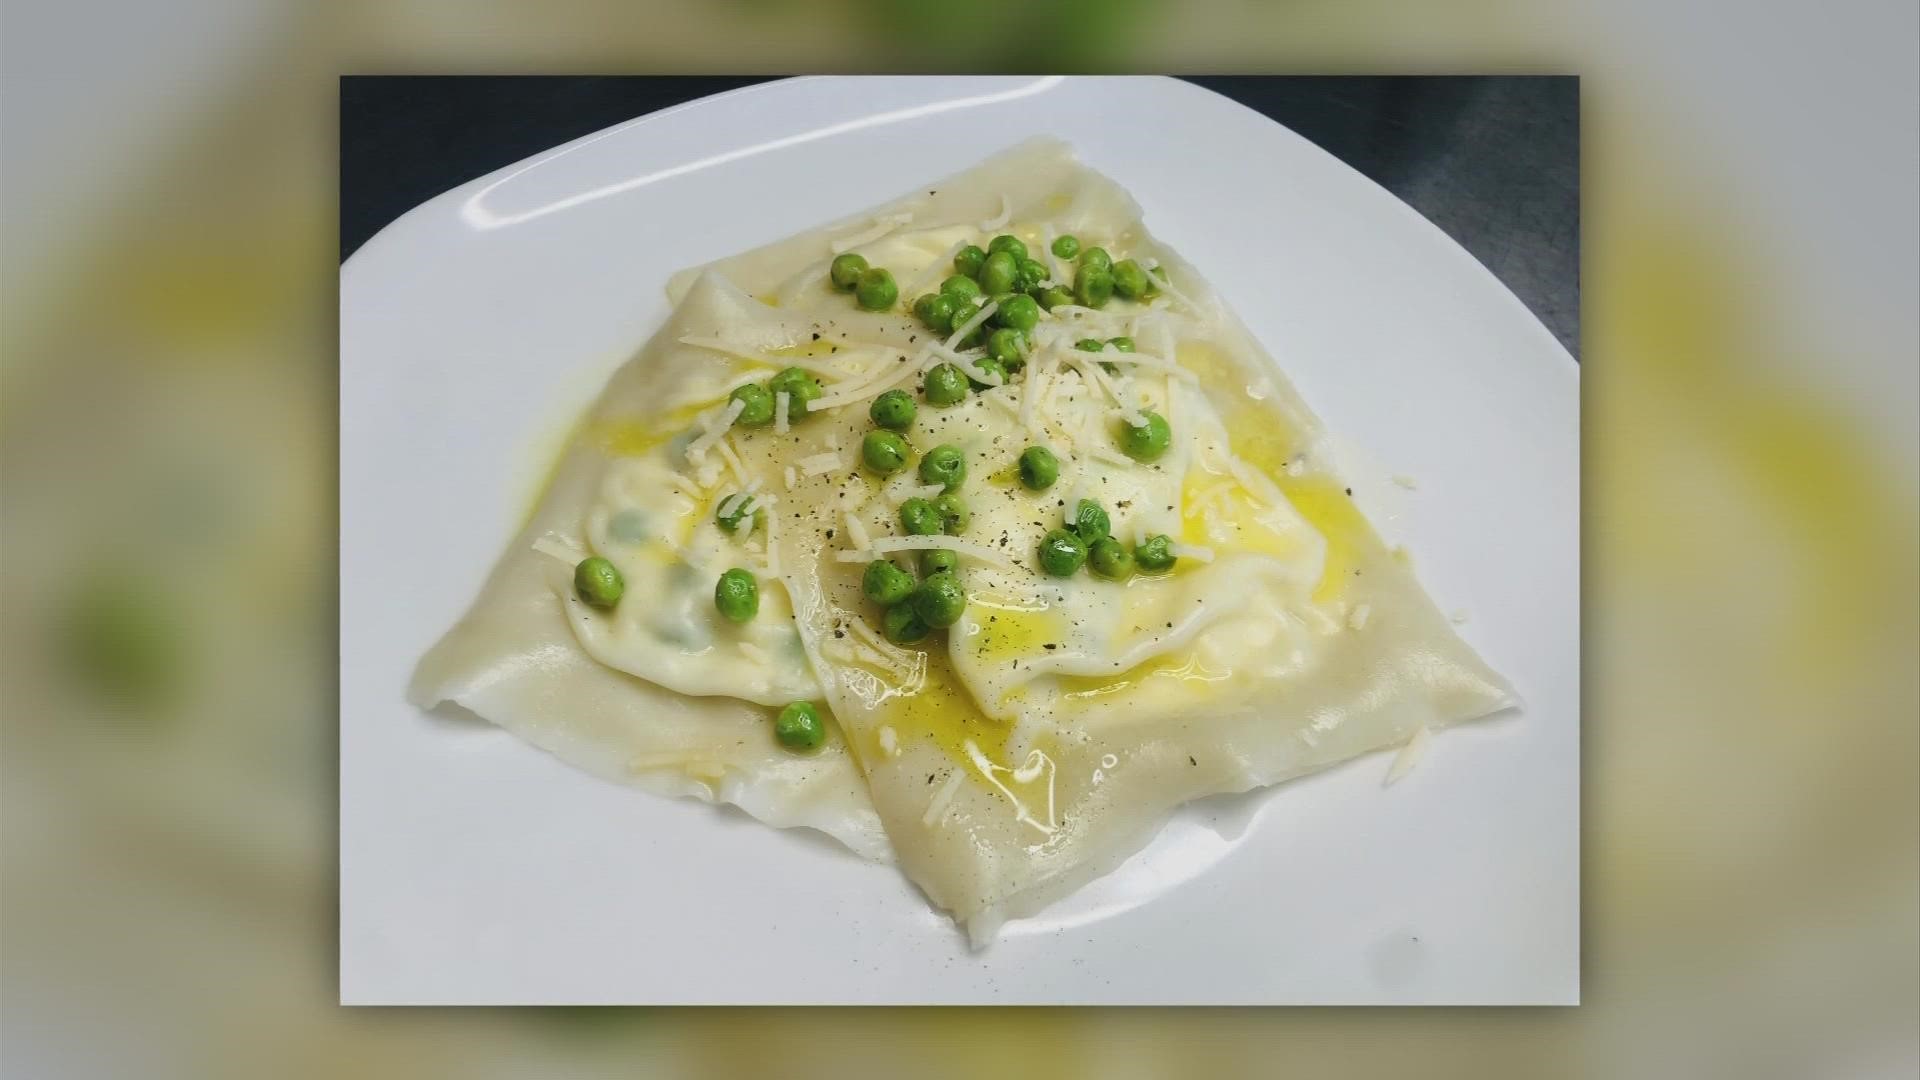 10TV's Brittany Bailey serves up the perfect dish for National Ravioli Day.